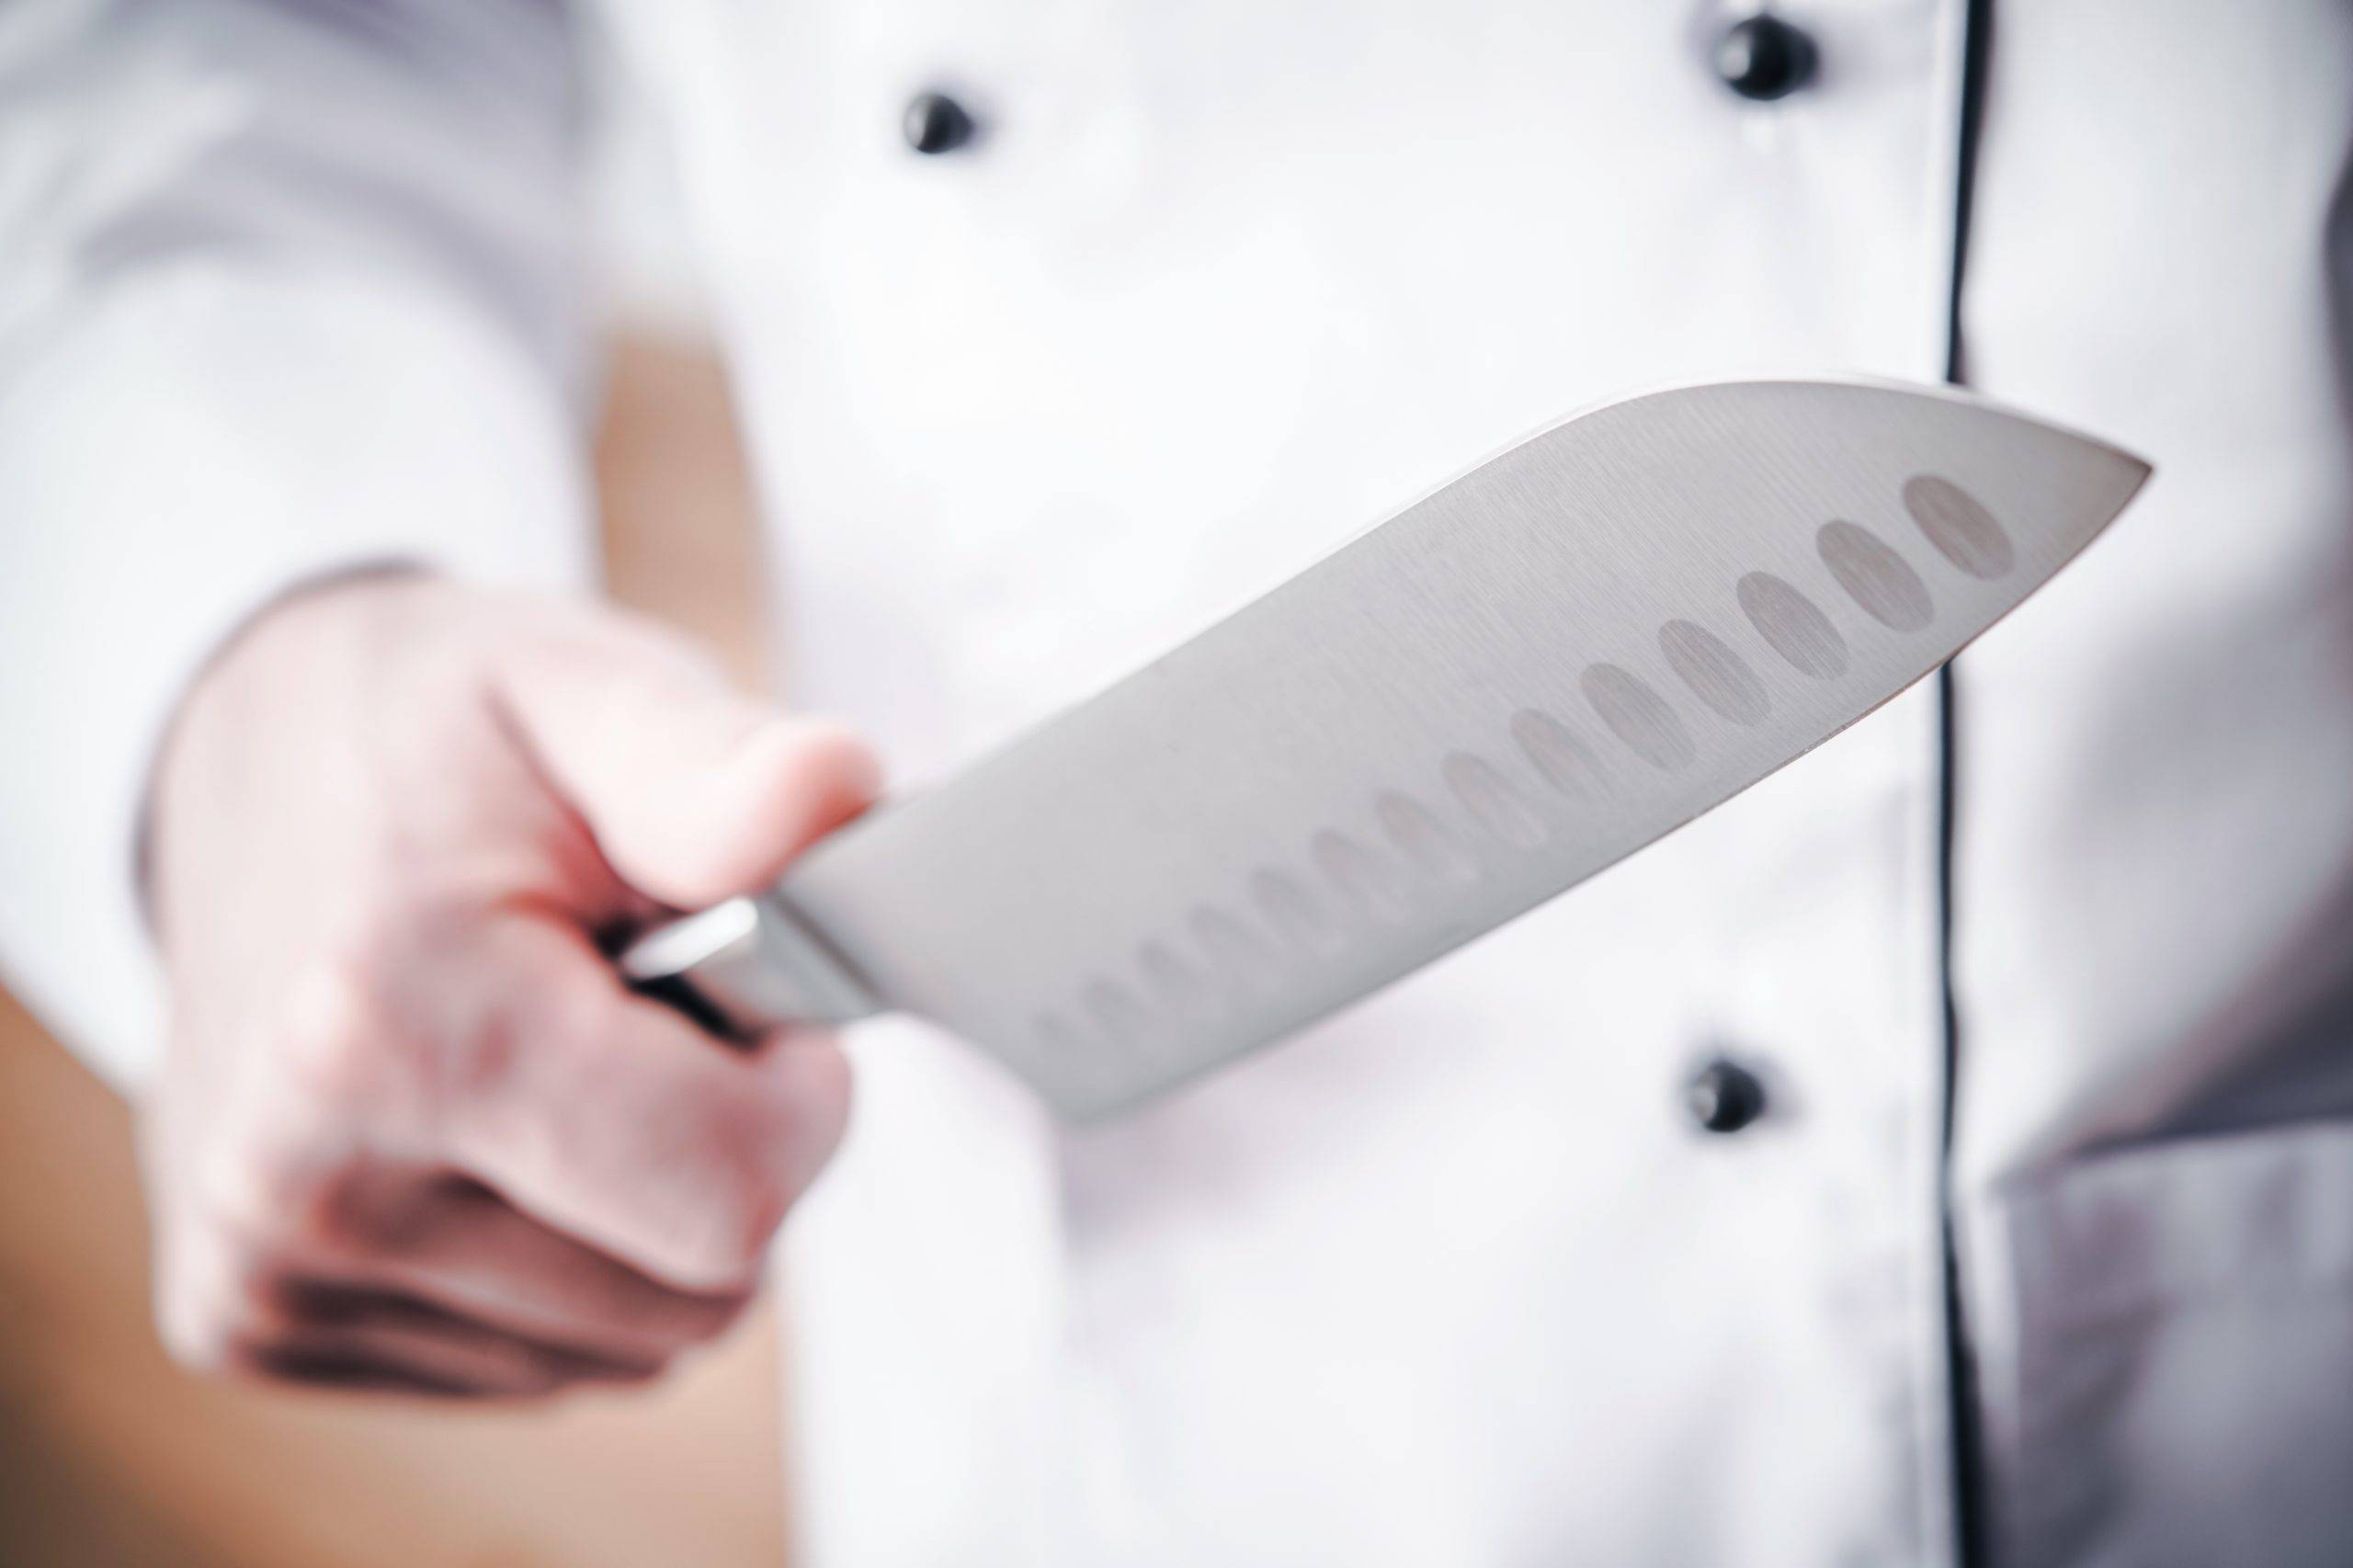 Kitchen Chef with Large Sharp Knife in a Hand. Meal Preparation.